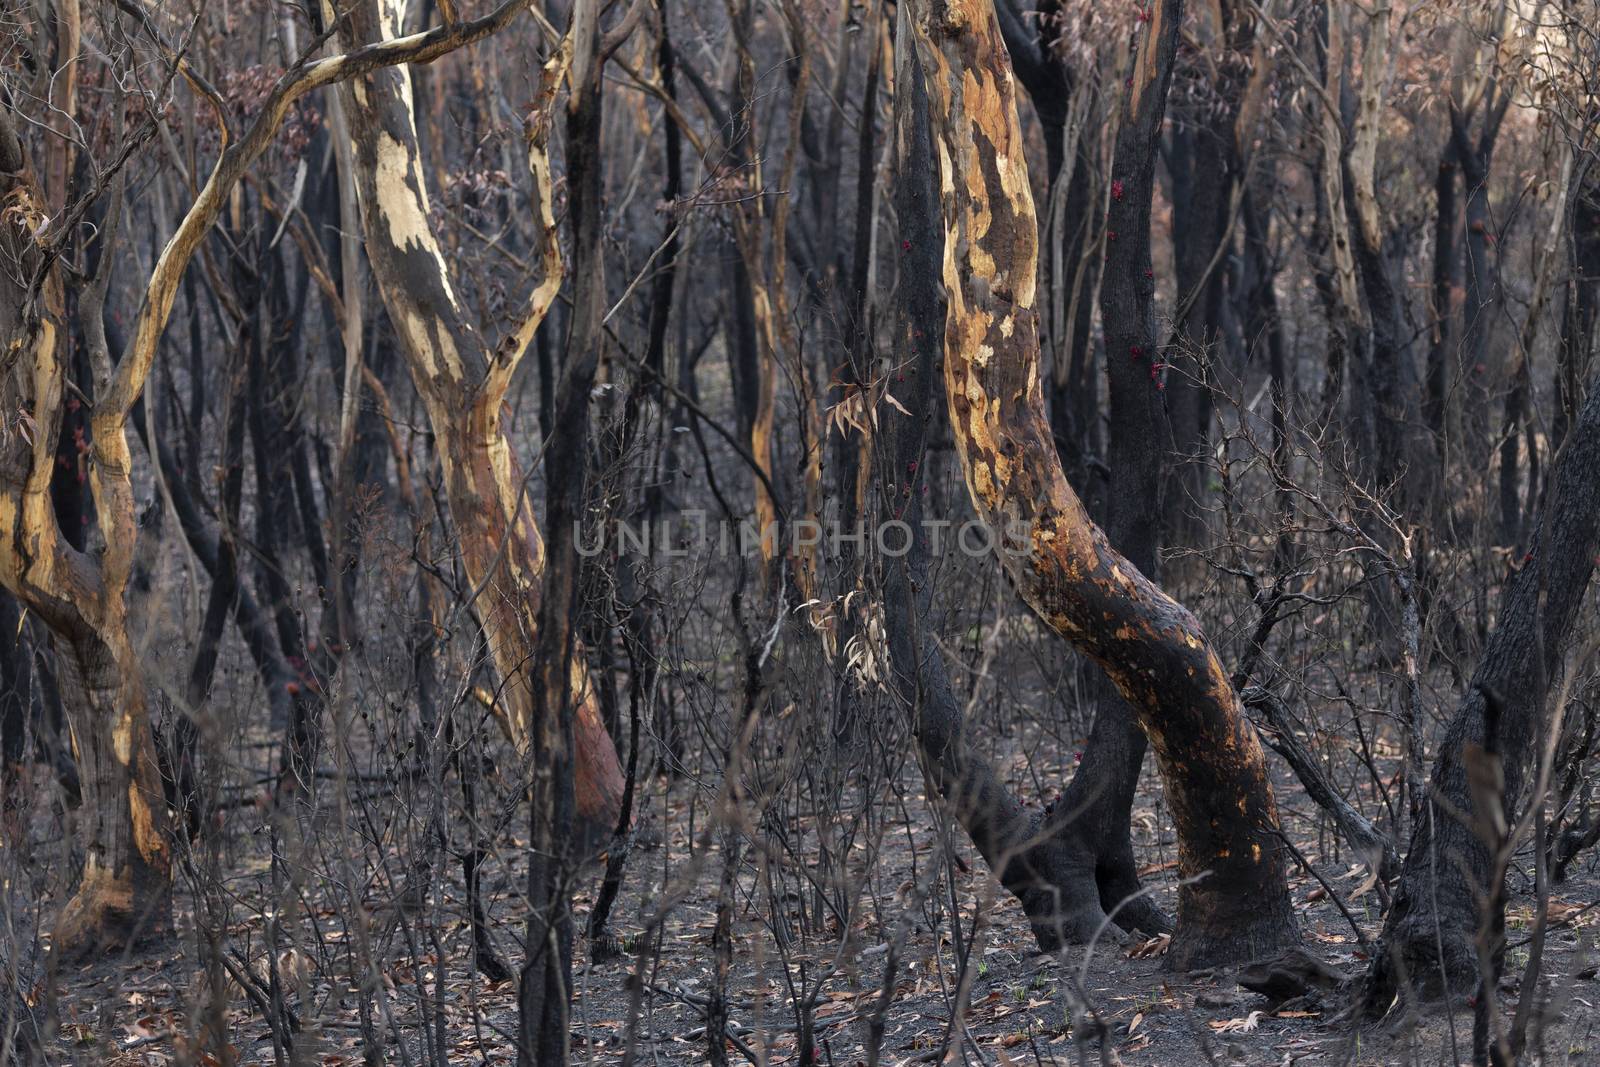 Australian bush fires, burnt landscape of trees after the fires of 2019-2020.  Some trees showing signs of regeneration just days later